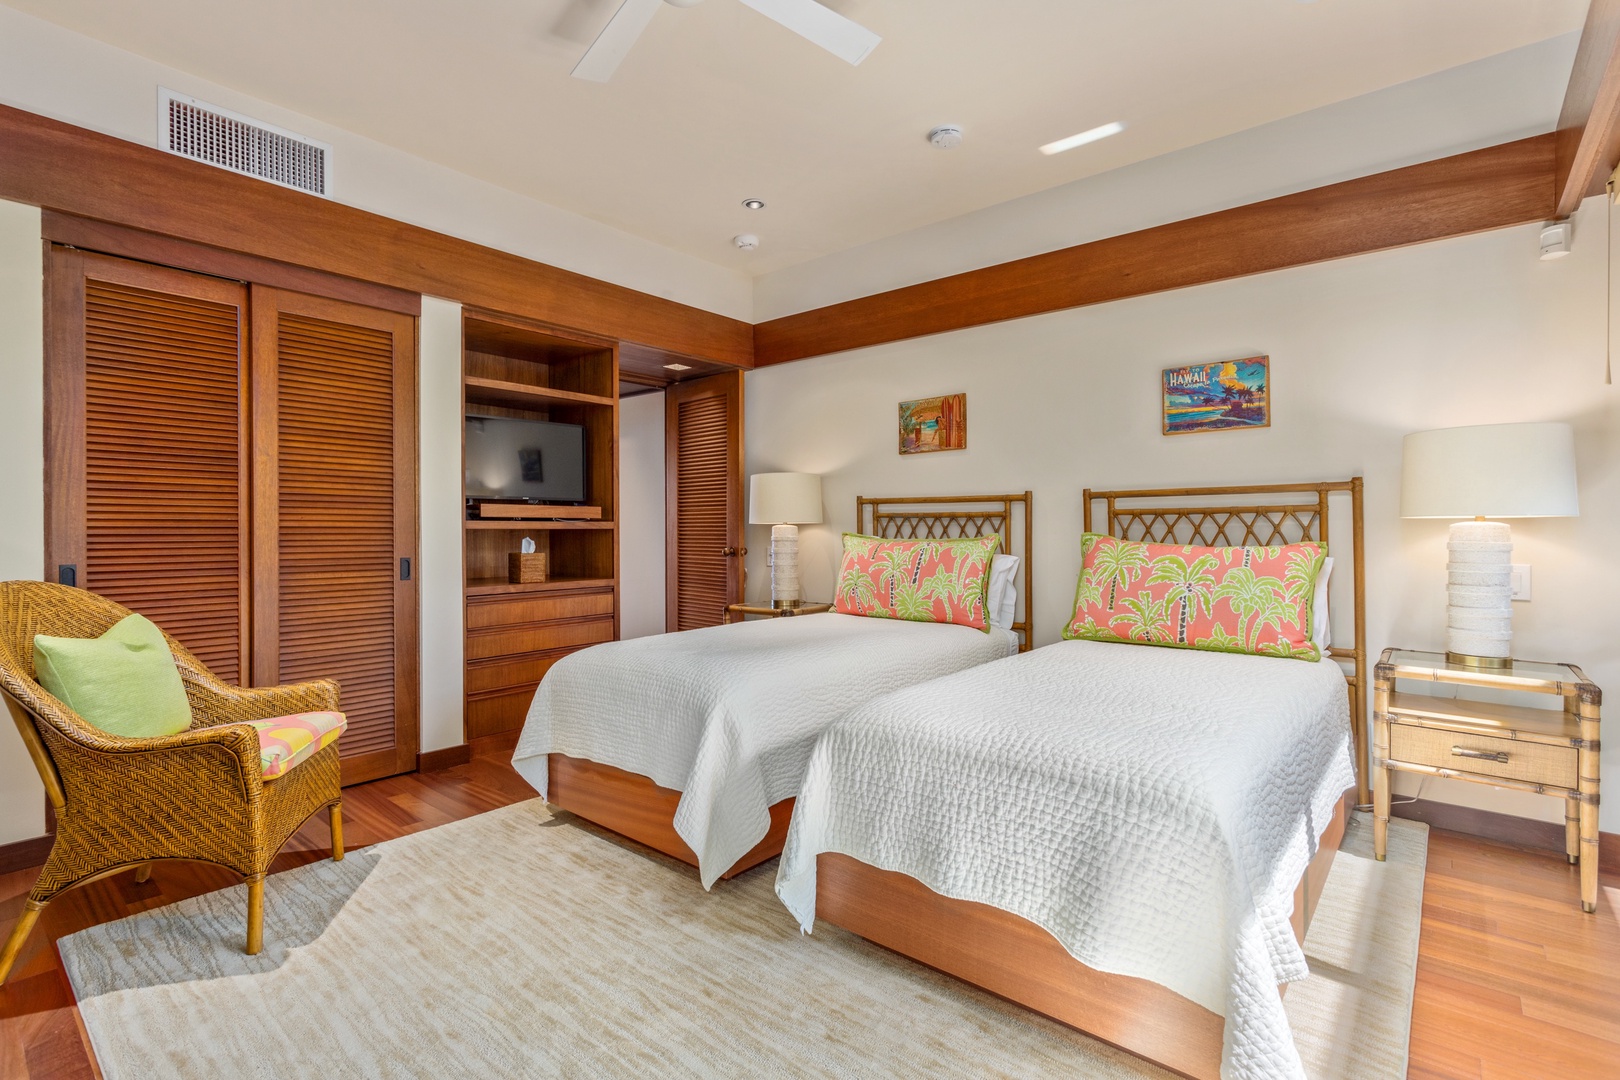 Kamuela Vacation Rentals, 4BD Villas (21) at Mauna Kea Resort - Fourth Bedroom w/Two Twin Beds (can convert to a King Upon Request), Flat Screen TV, Sliding Doors to Outdoor Shower Garden & Ensuite Bath.